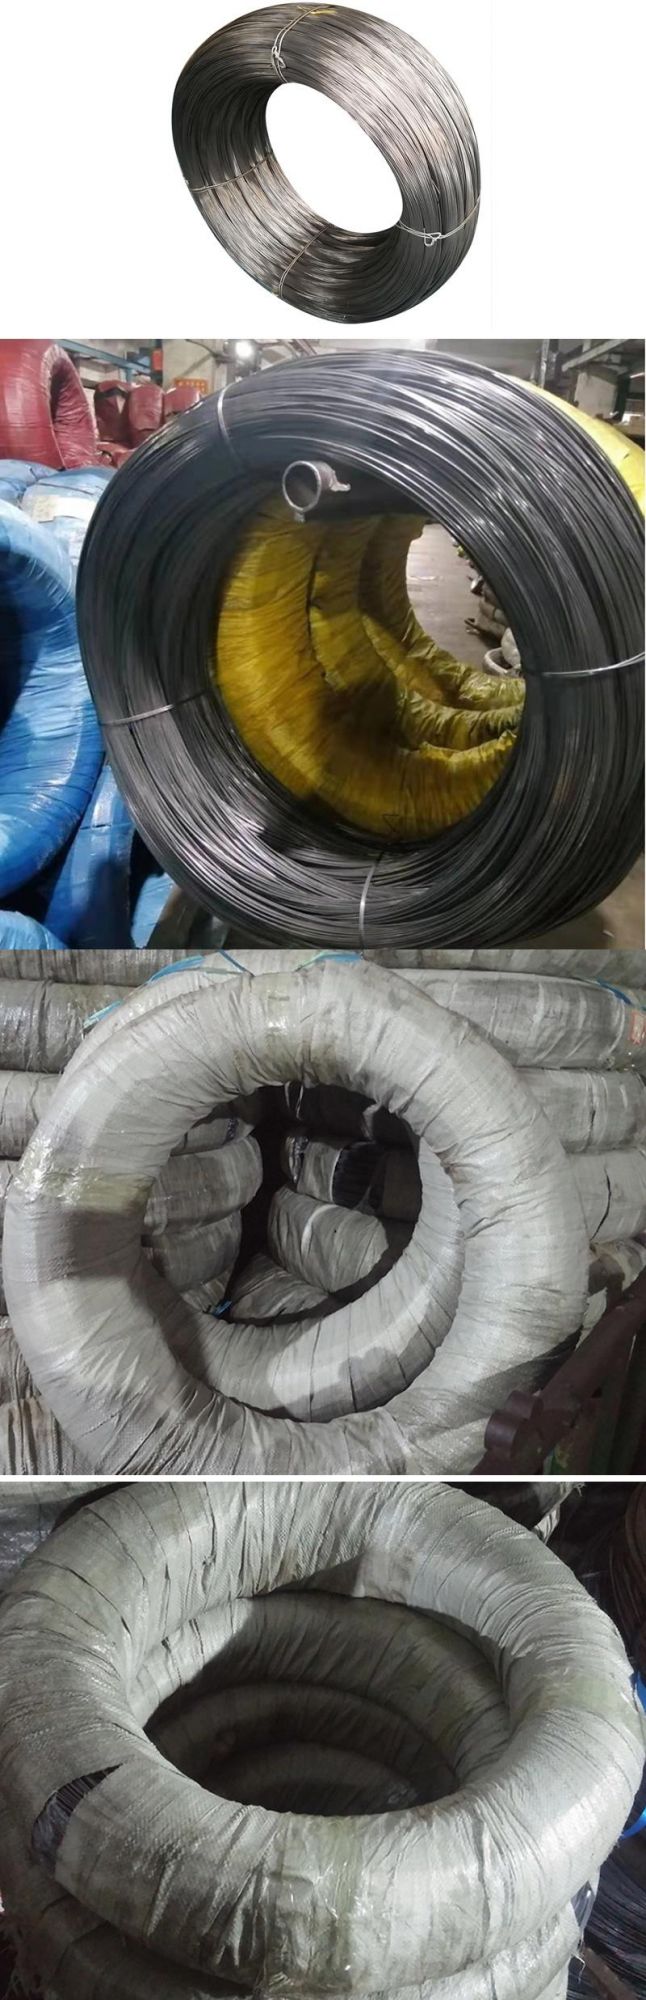 Wholesale 1.9-2.4mm Steel Wire for Spring Mattress